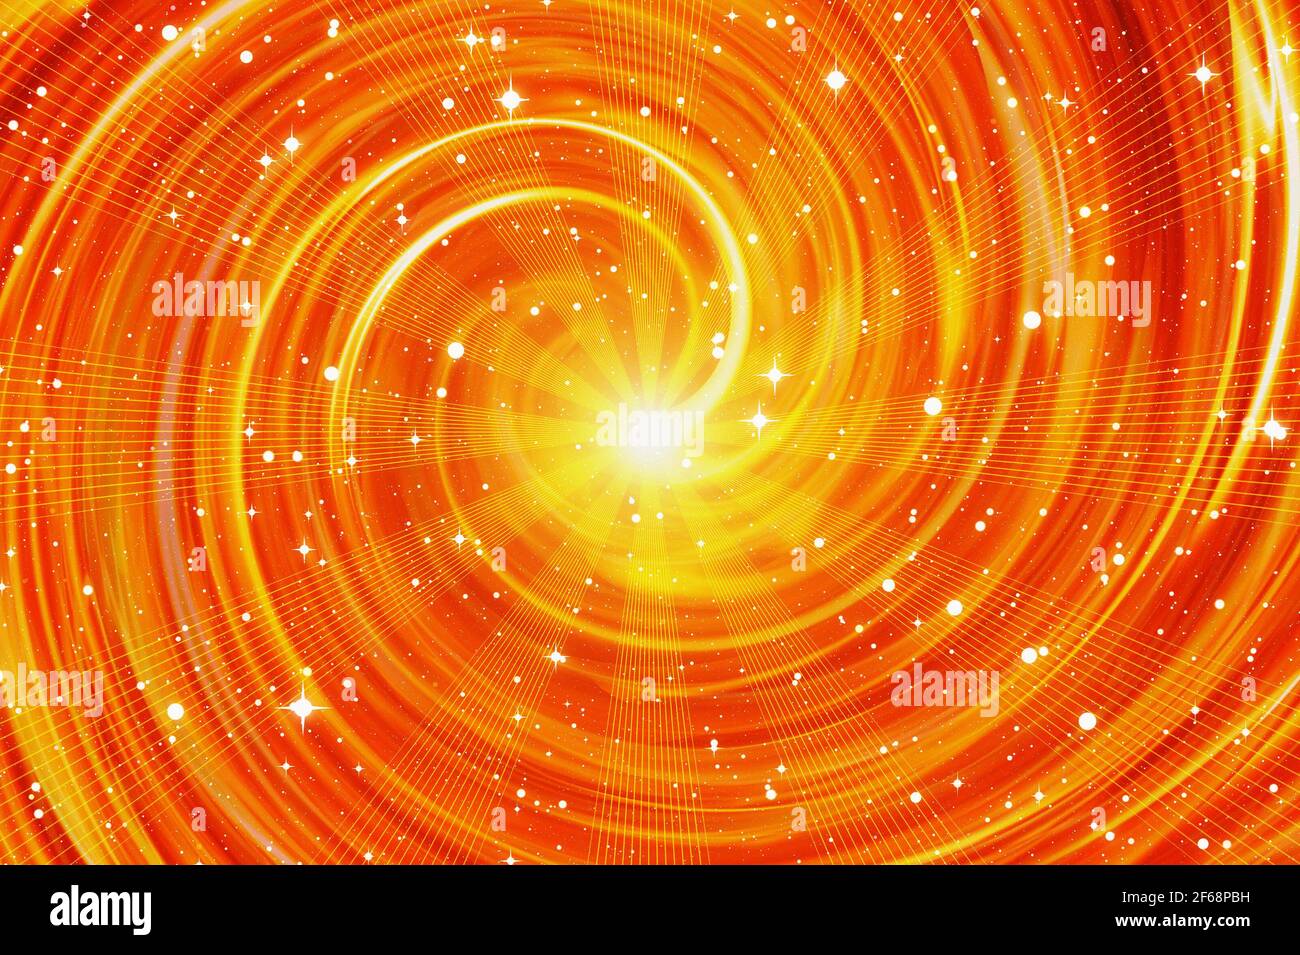 sun rays and space stars on twirl fire background Stock Photo